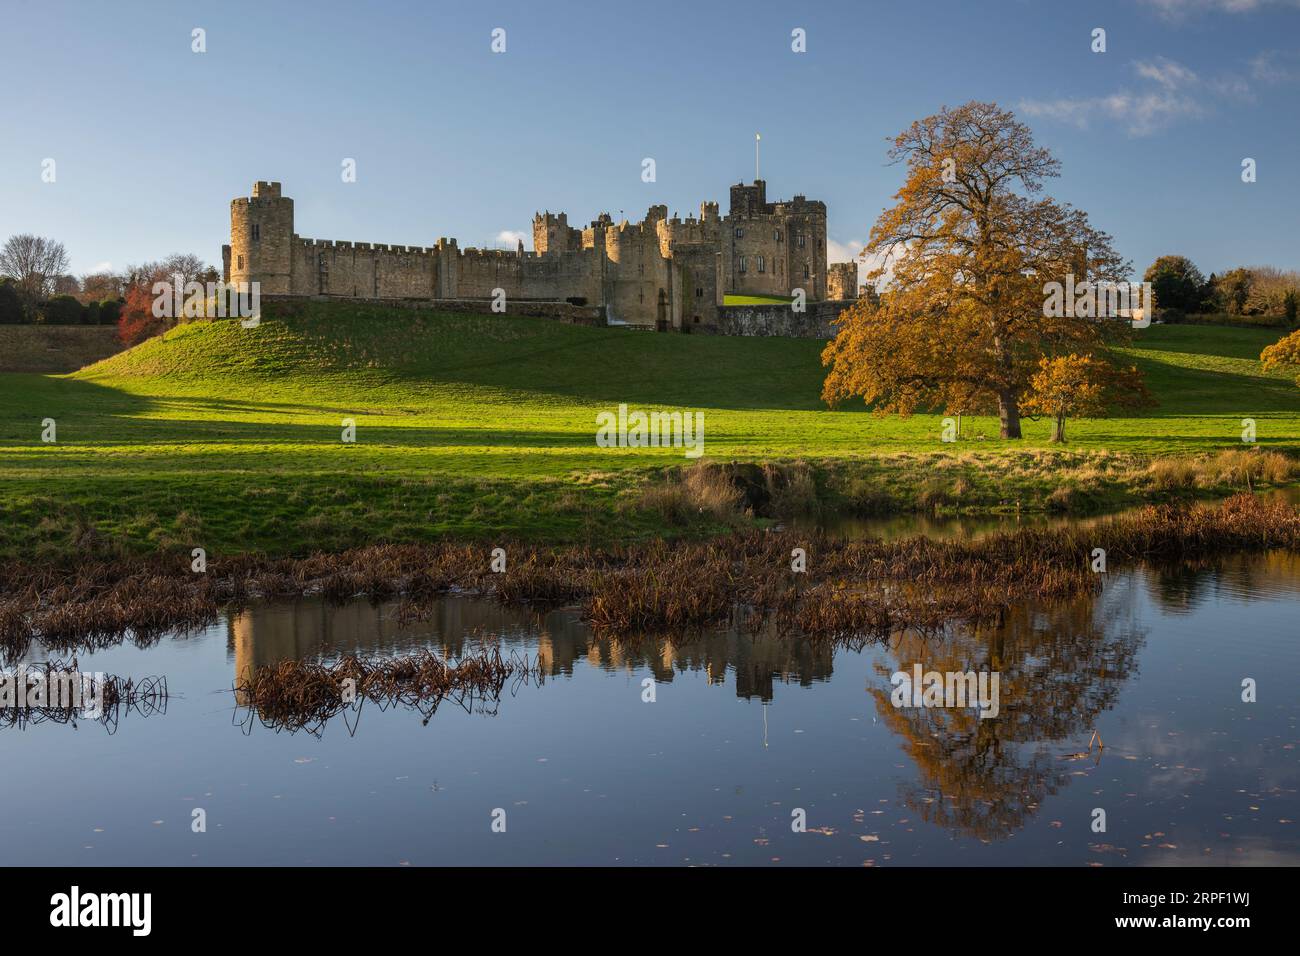 Autumn colours on the banks of the river Aln with Alnwick Castle in the background, Alnwick, Northumberland, UK autumn/winter (November) Stock Photo